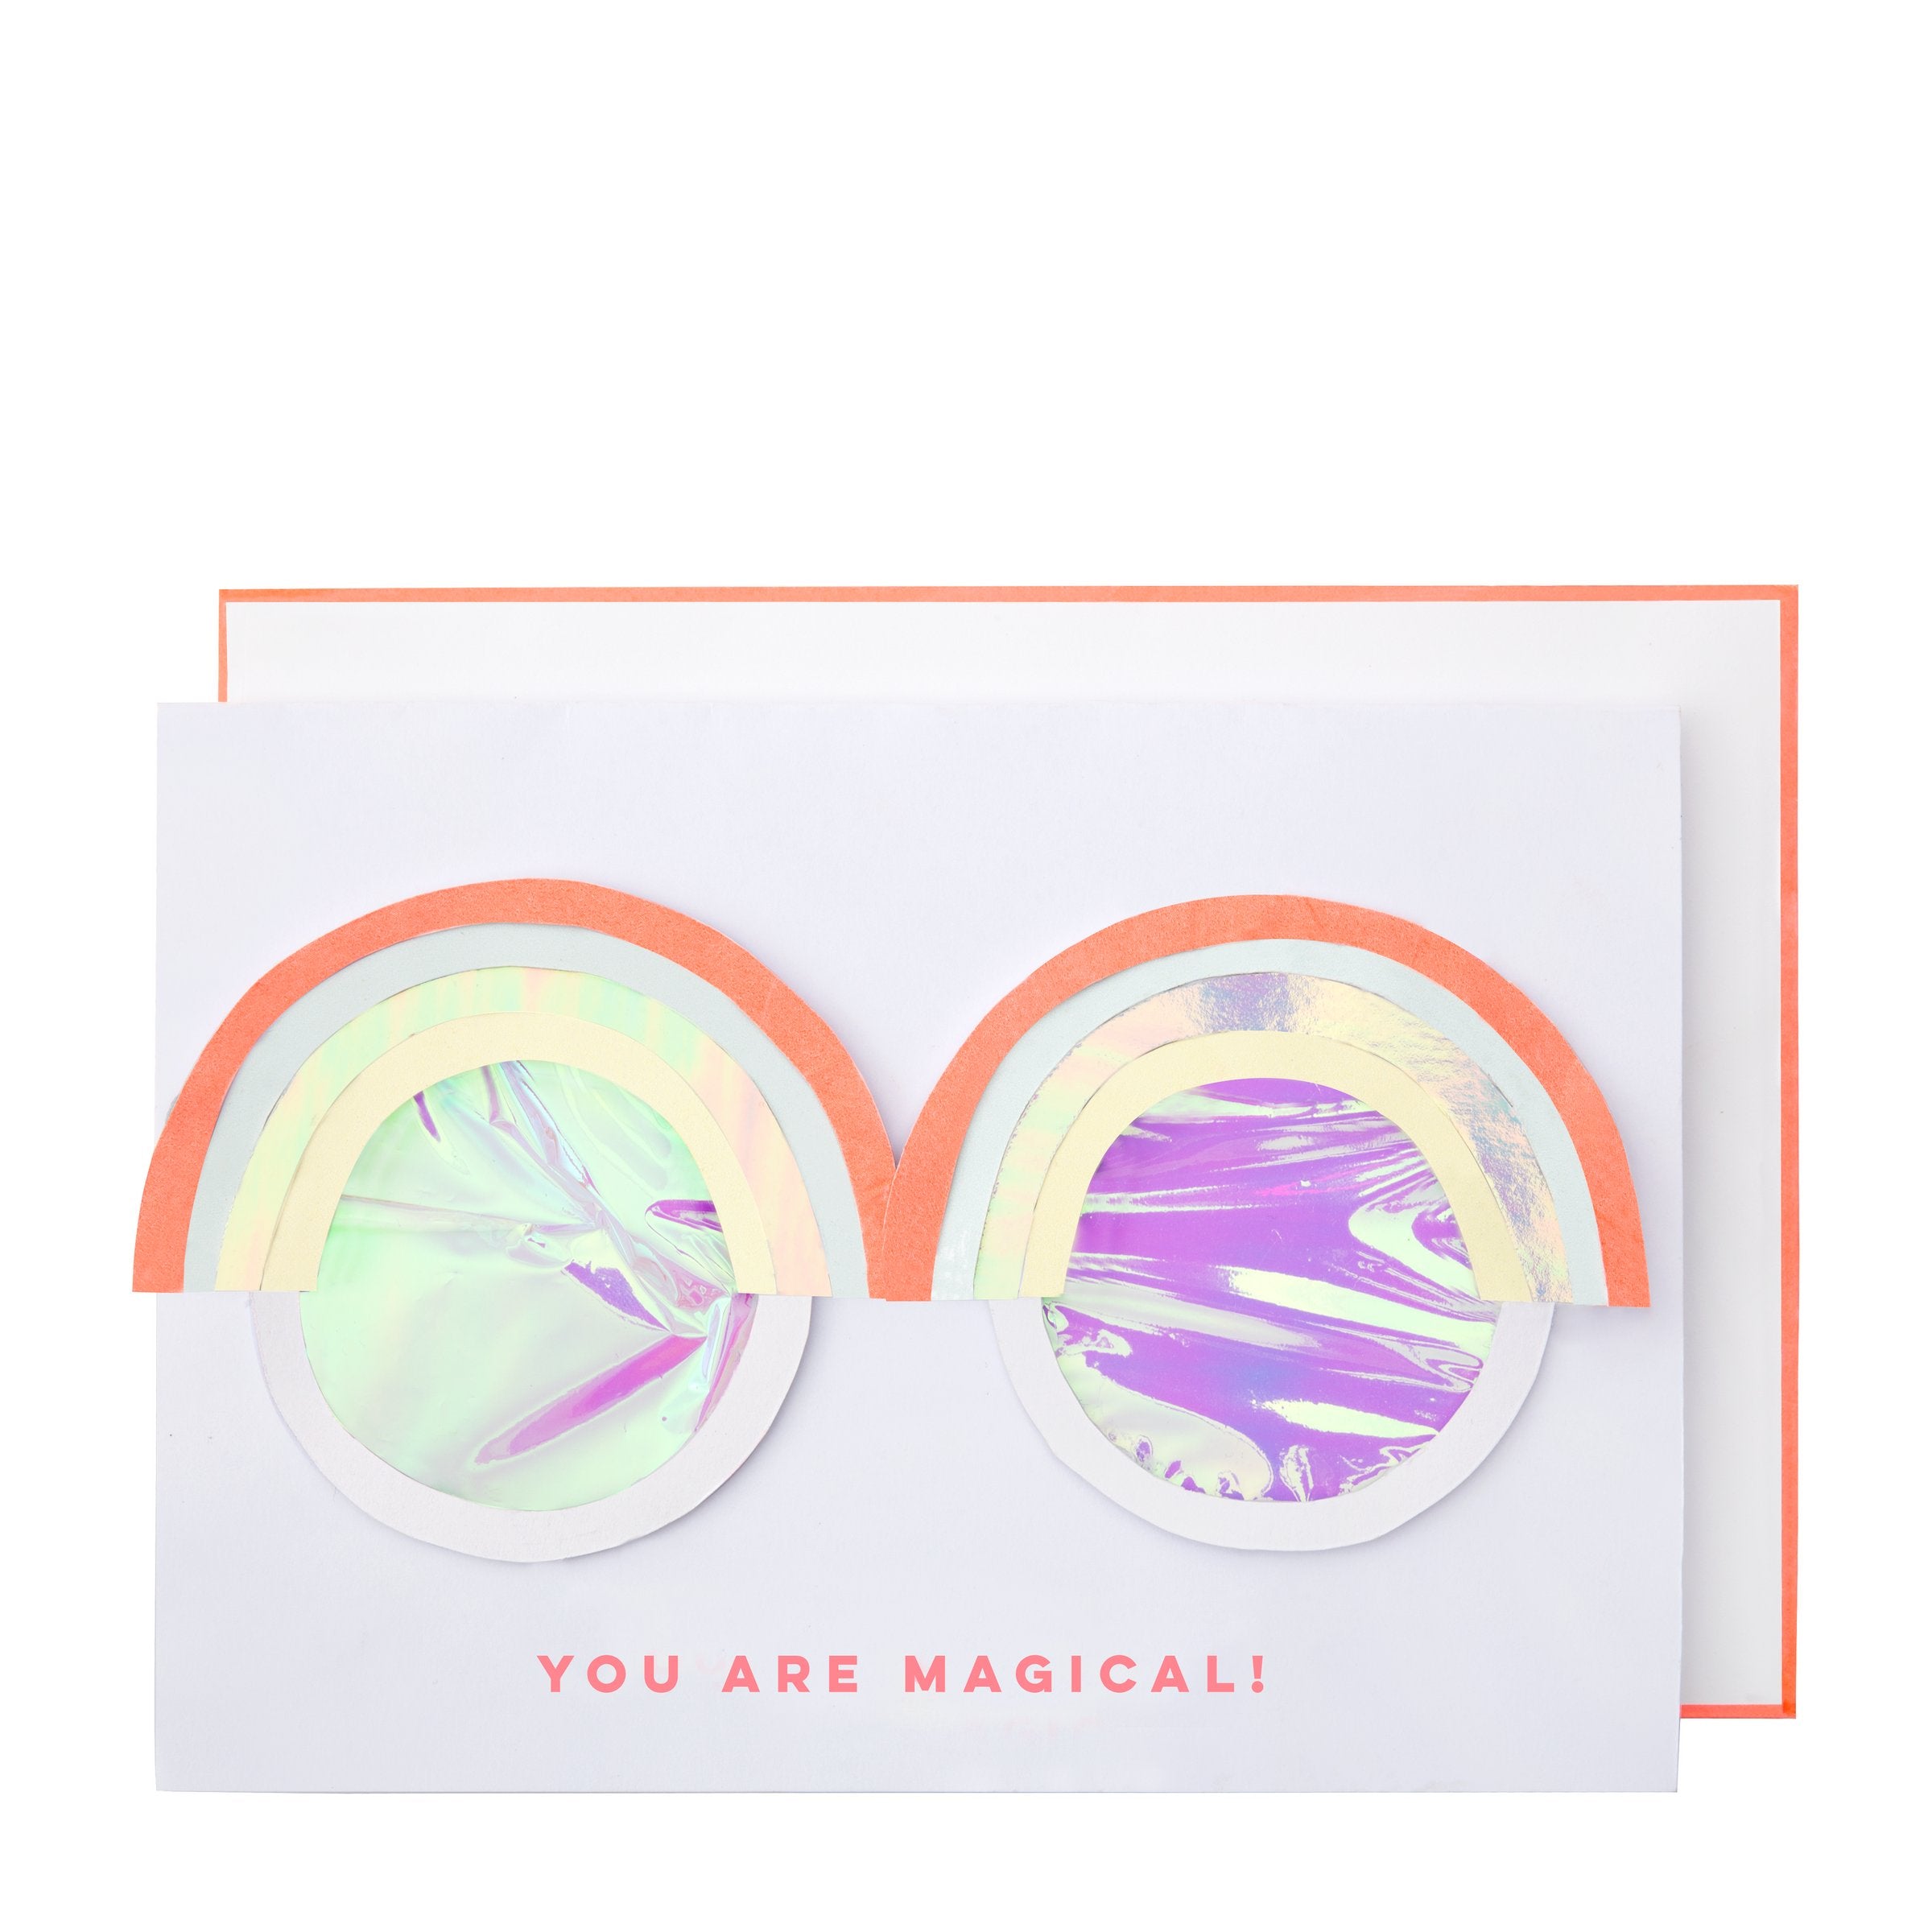 This wonderful greeting card features the words "You are Magical!" and has a pair of wearable rainbow glasses.